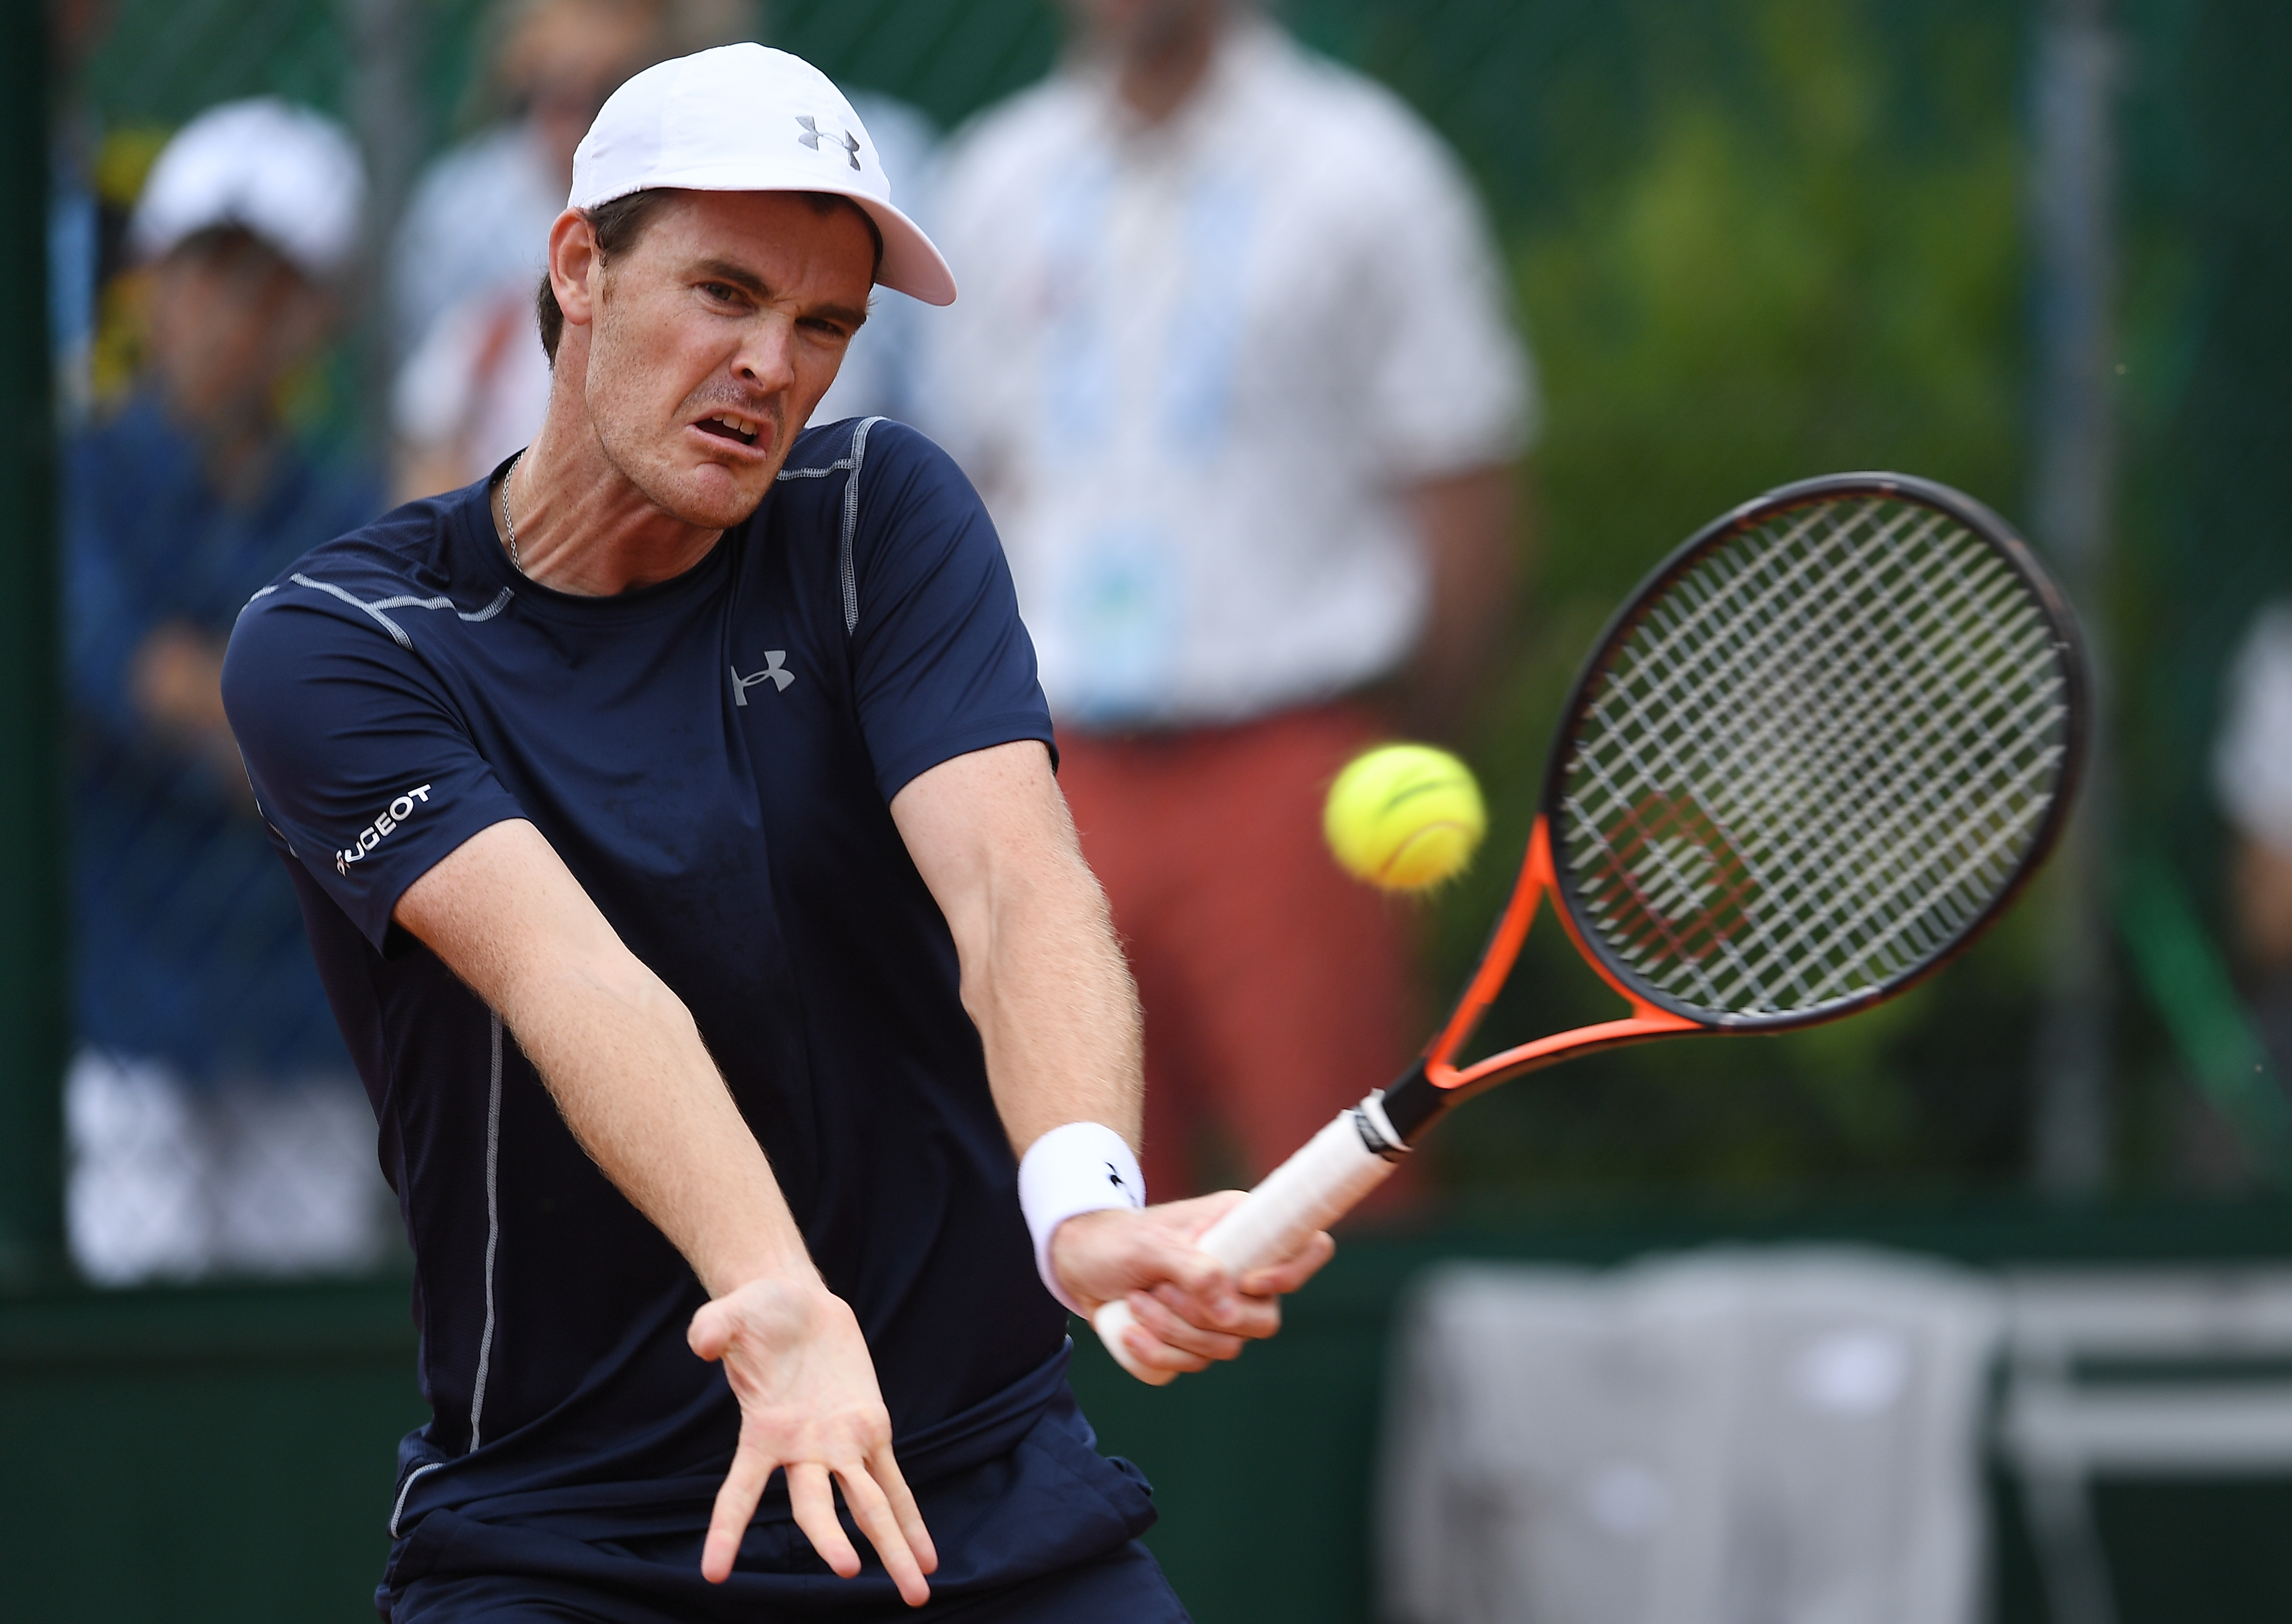 PARIS, FRANCE - MAY 28: Jamie Murray of Great Britain hits a forehand during the Men's Doubles second round match against David Guez of France and Vincent Millot of France on day seven of the 2016 French Open at Roland Garros on May 28, 2016 in Paris, France. (Photo by Dennis Grombkowski/Getty Images)